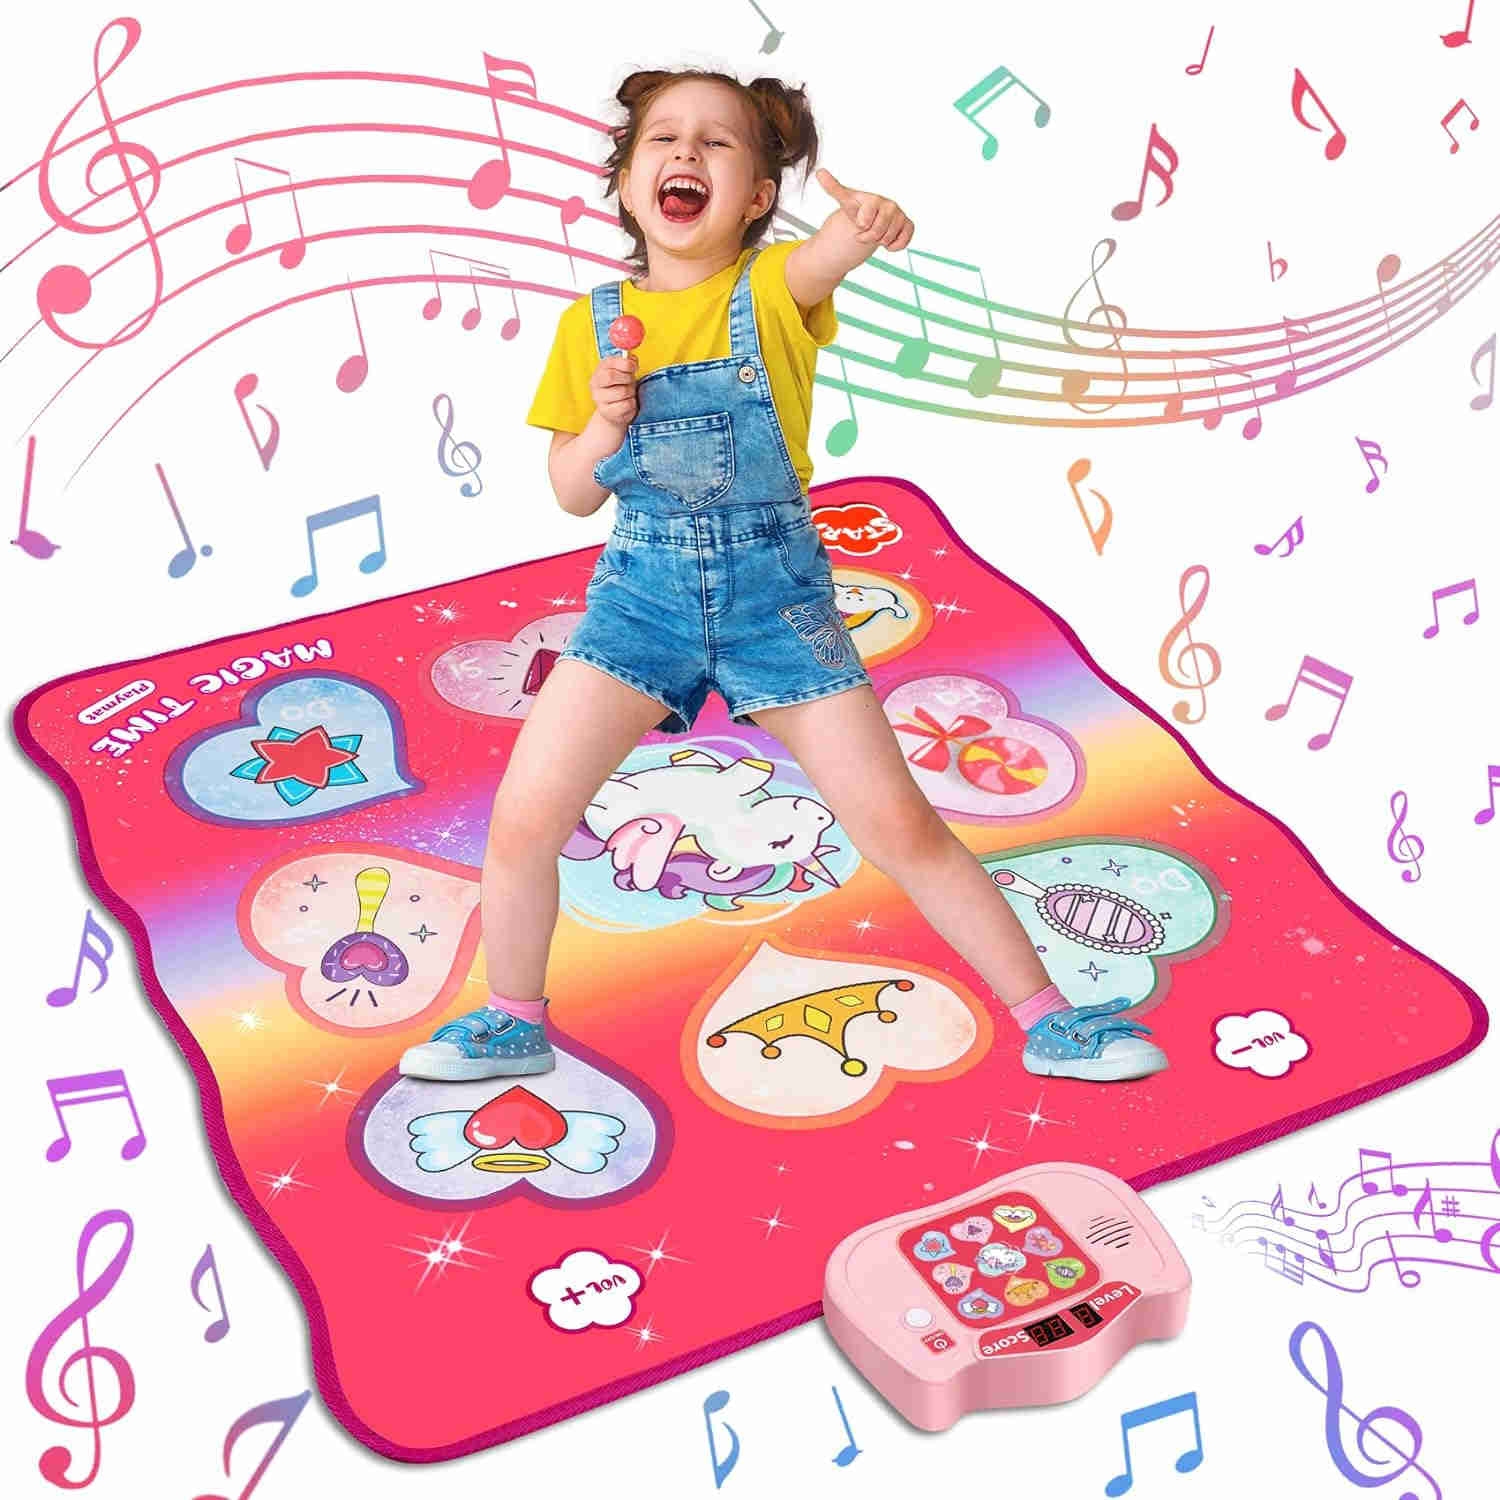 BAZADER Unicorn Theme Dance Mat - Toys for Girls 3 4 5 6 7 8+ Year Old, Dance Pad with 5 Game Modes, 3 Challenge Levels, 8 Built-in Music, Christmas Birthday Gifts for Kids Ages 3-12